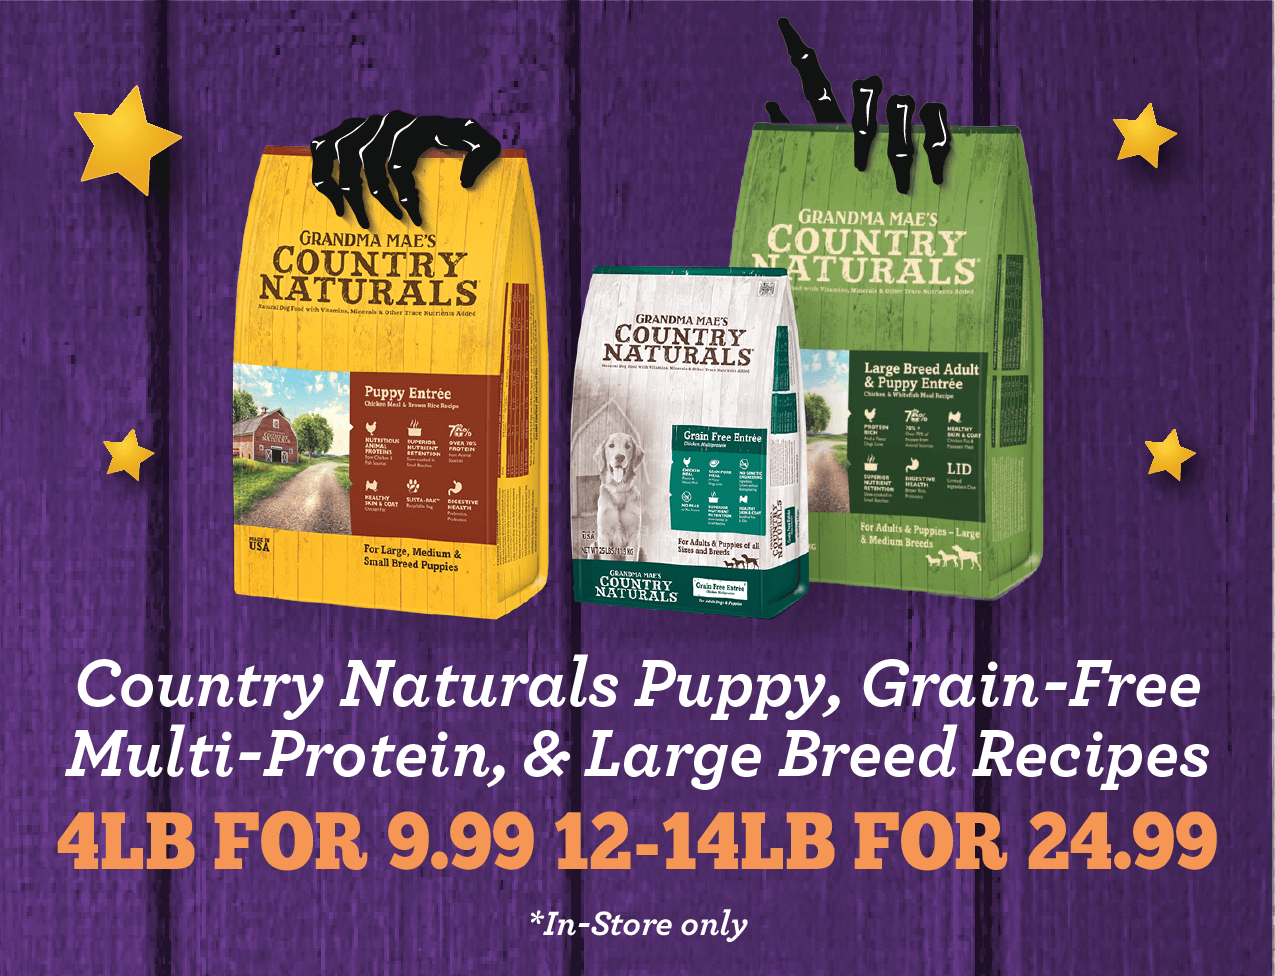 Country Naturals Puppy, Grain-Free Multi-Protein, and Large Breed Recipes - 4lb for 9.99, 12-14lb for 24.99